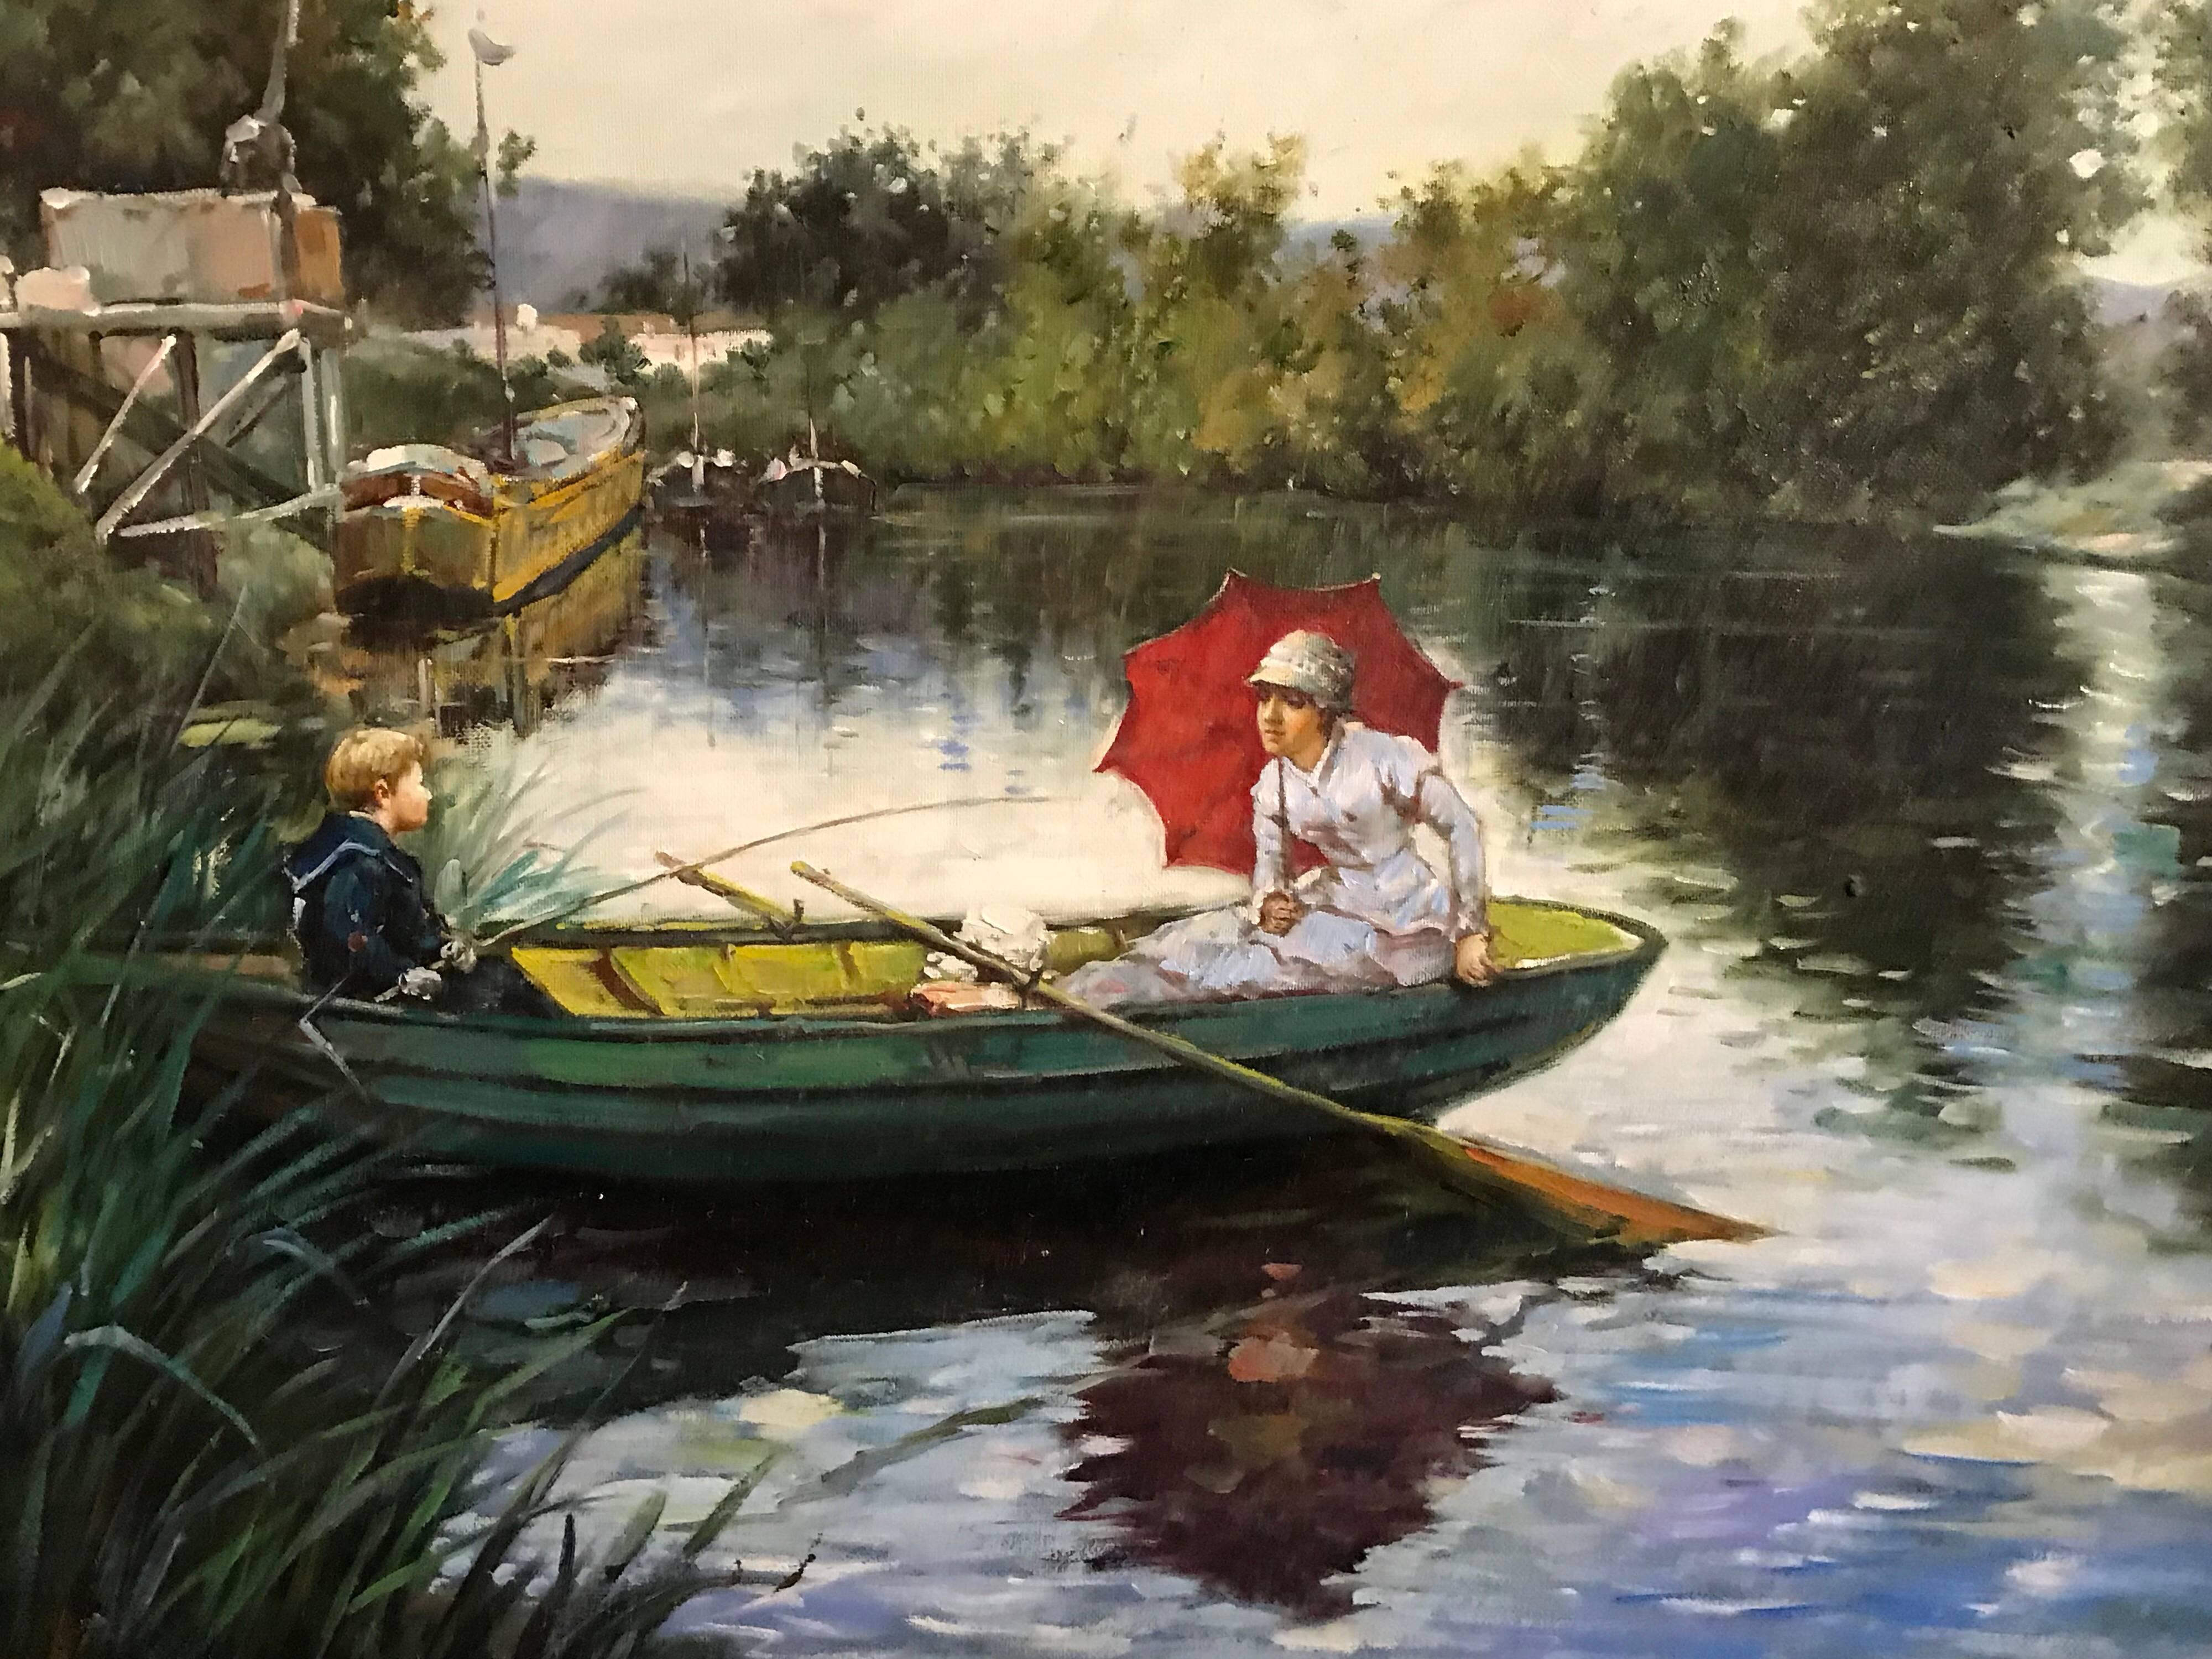 Punting on the River, large oil painting on canvas 1